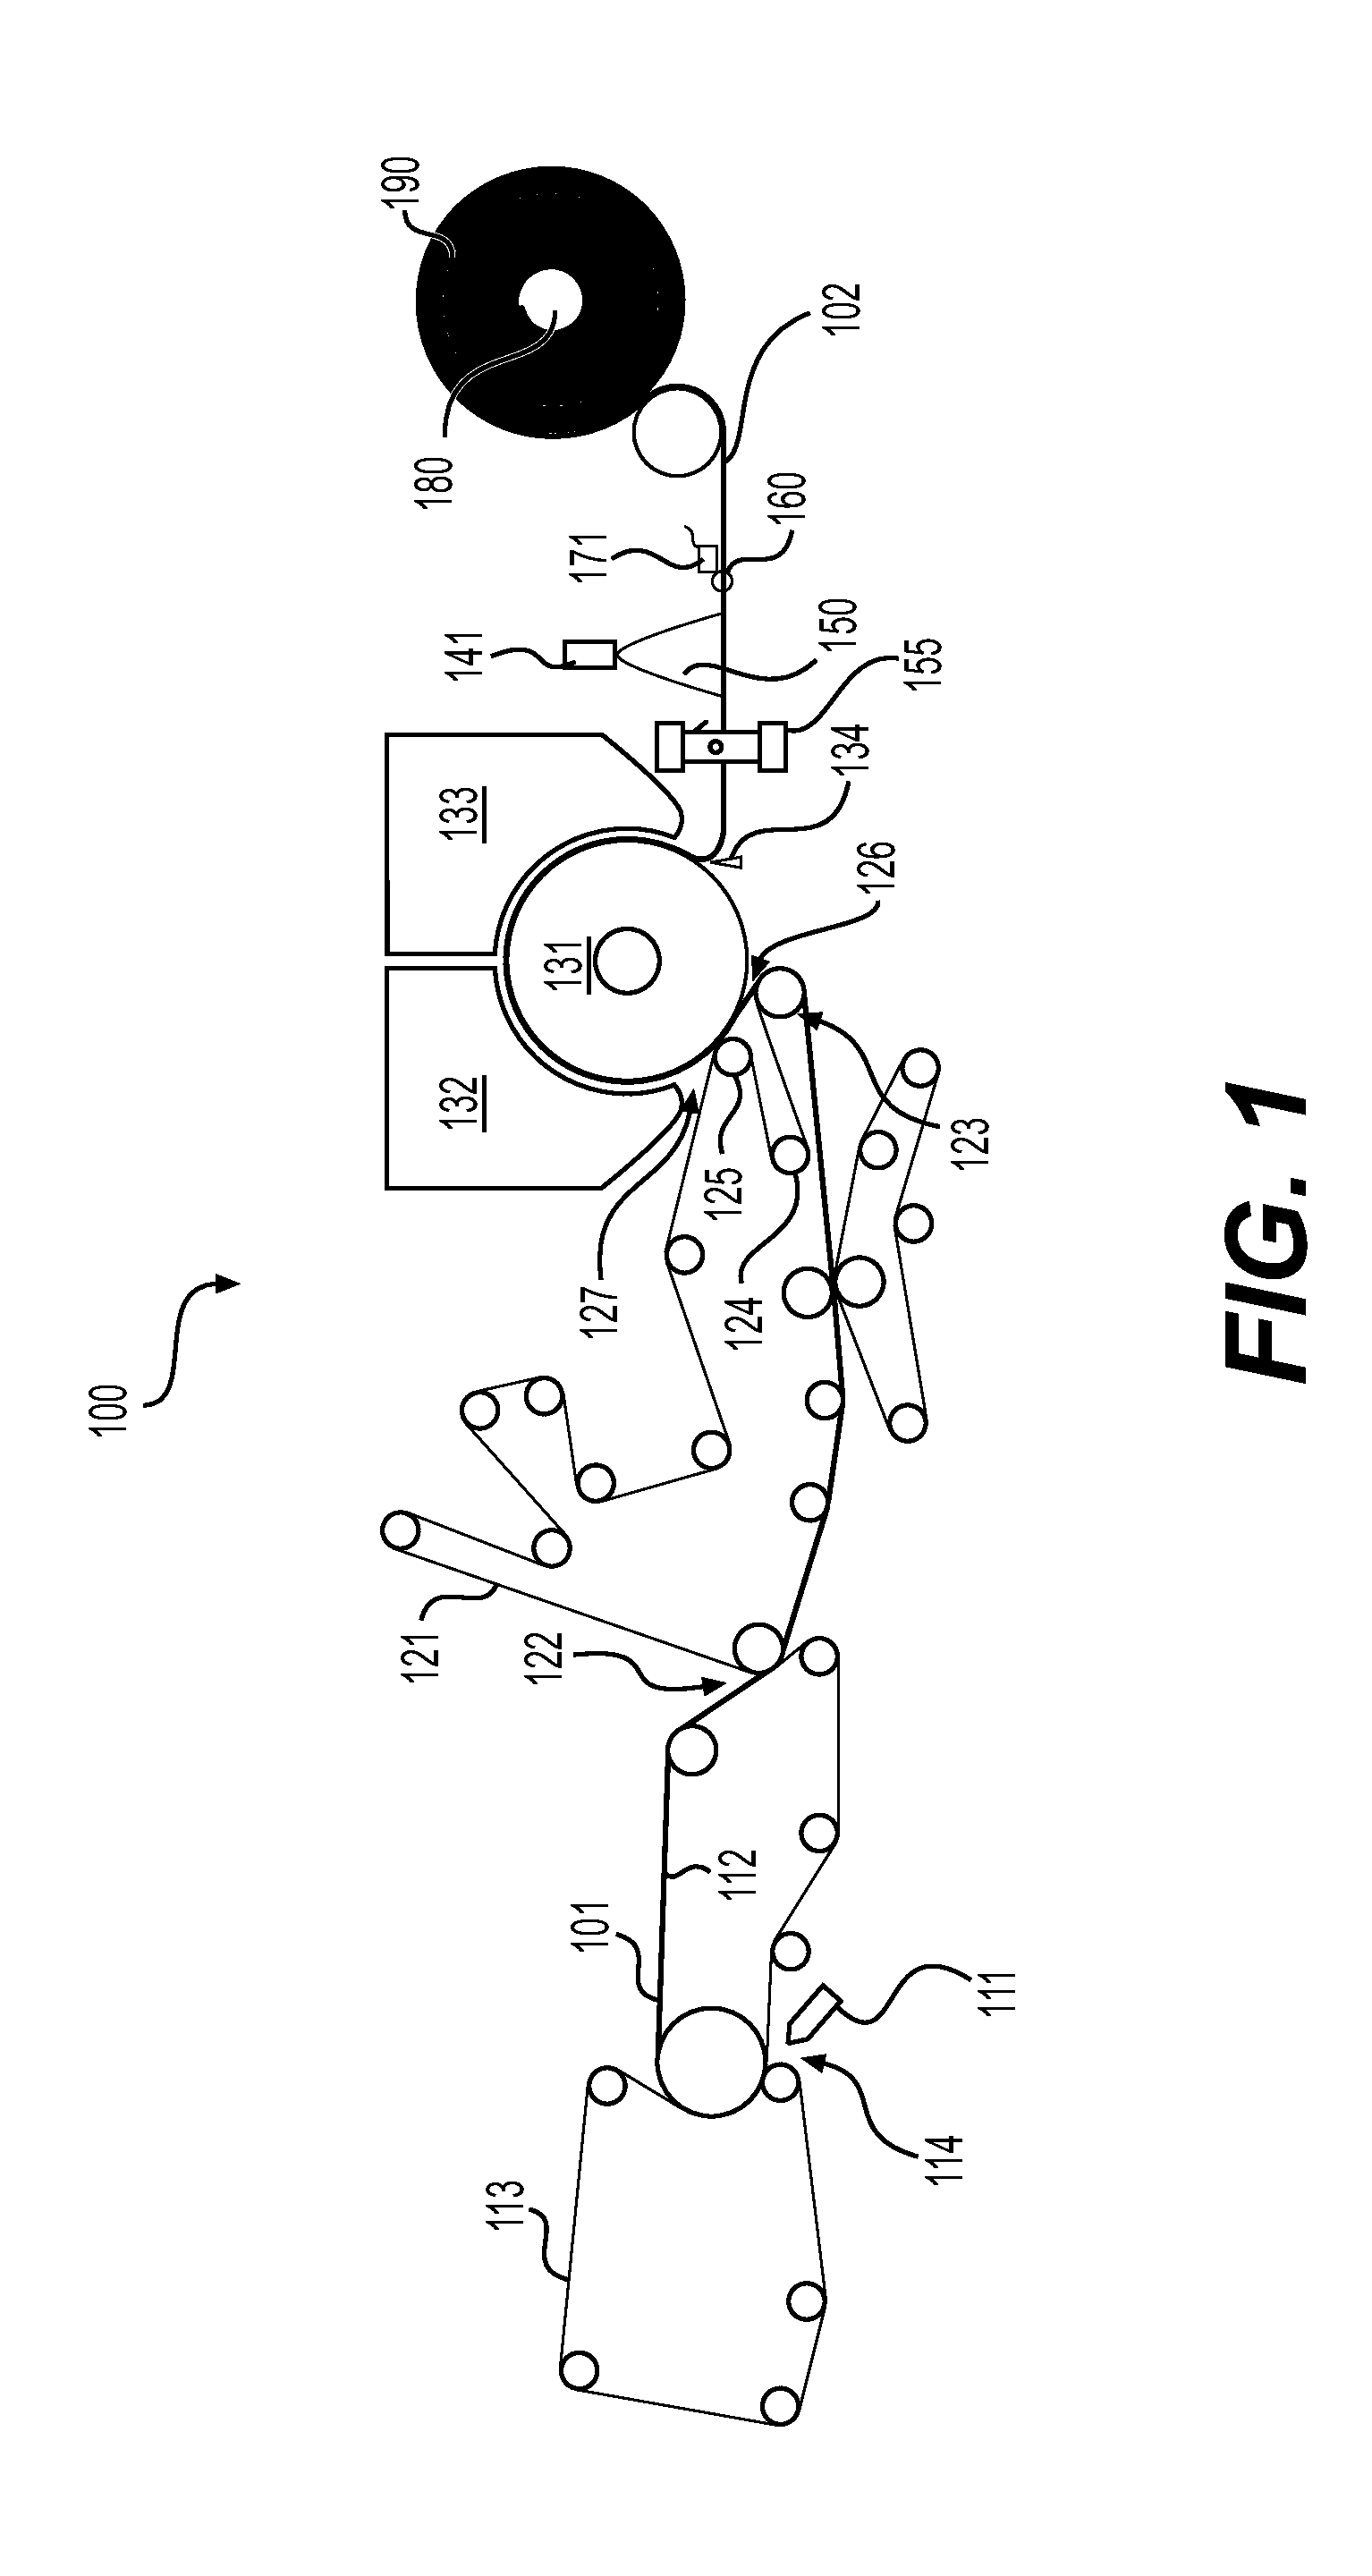 Methods and apparatuses for controlling a manufacturing line used to convert a paper web into paper products by reading marks on the paper web